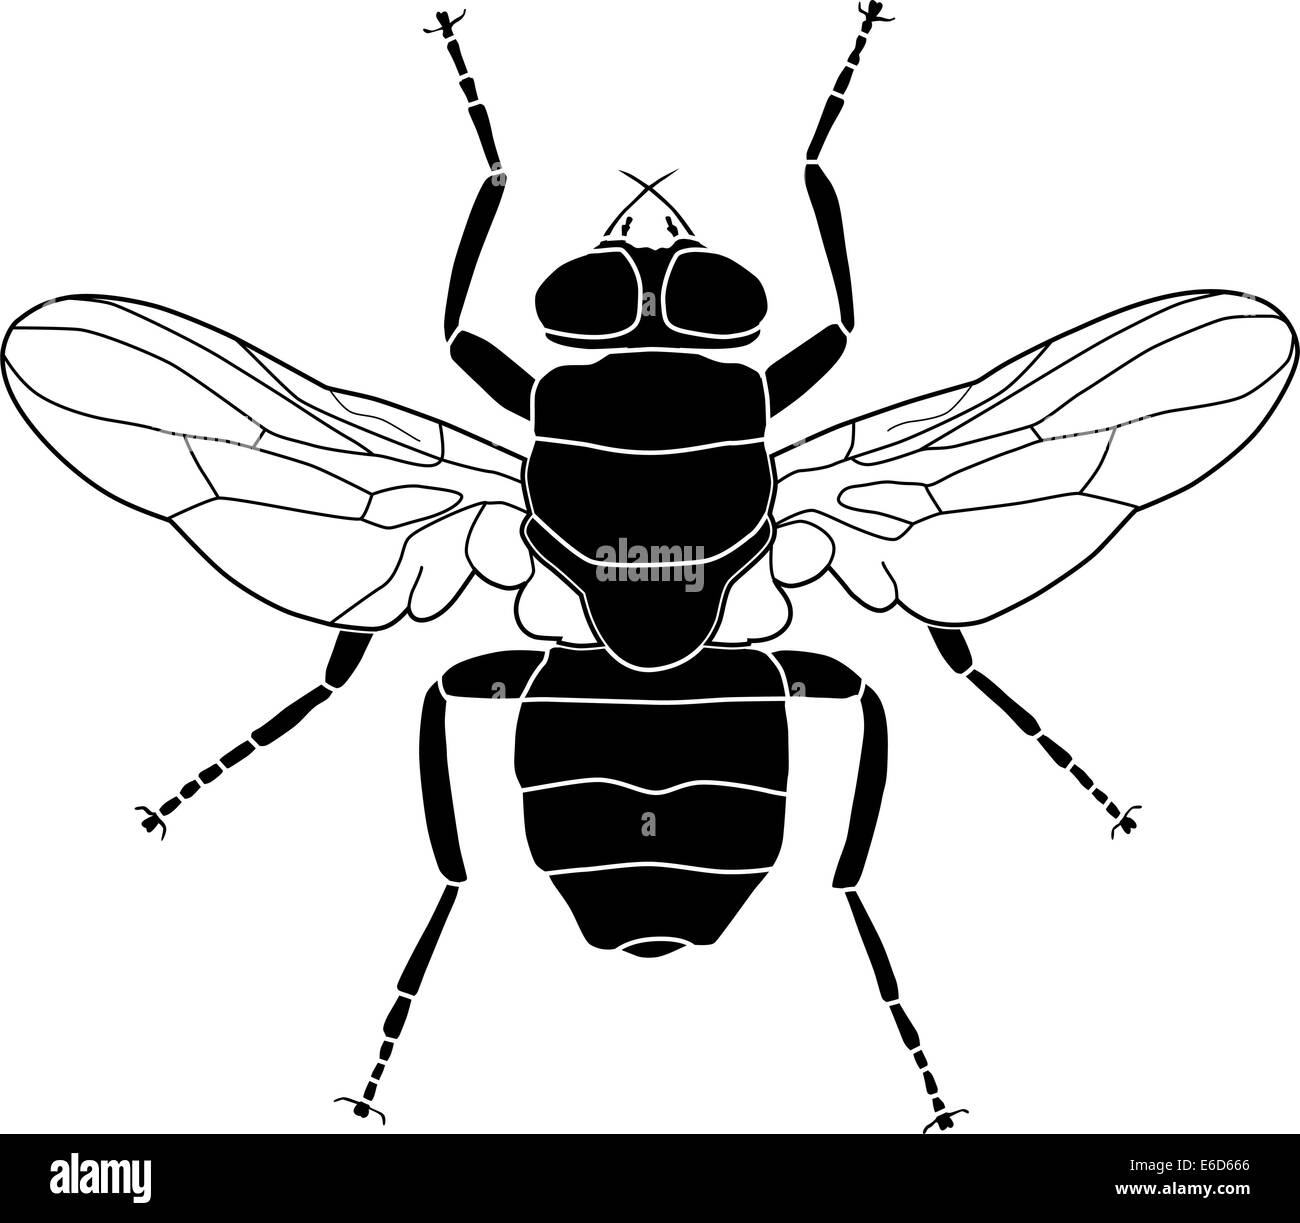 Vector illustration of a common fly Stock Vector